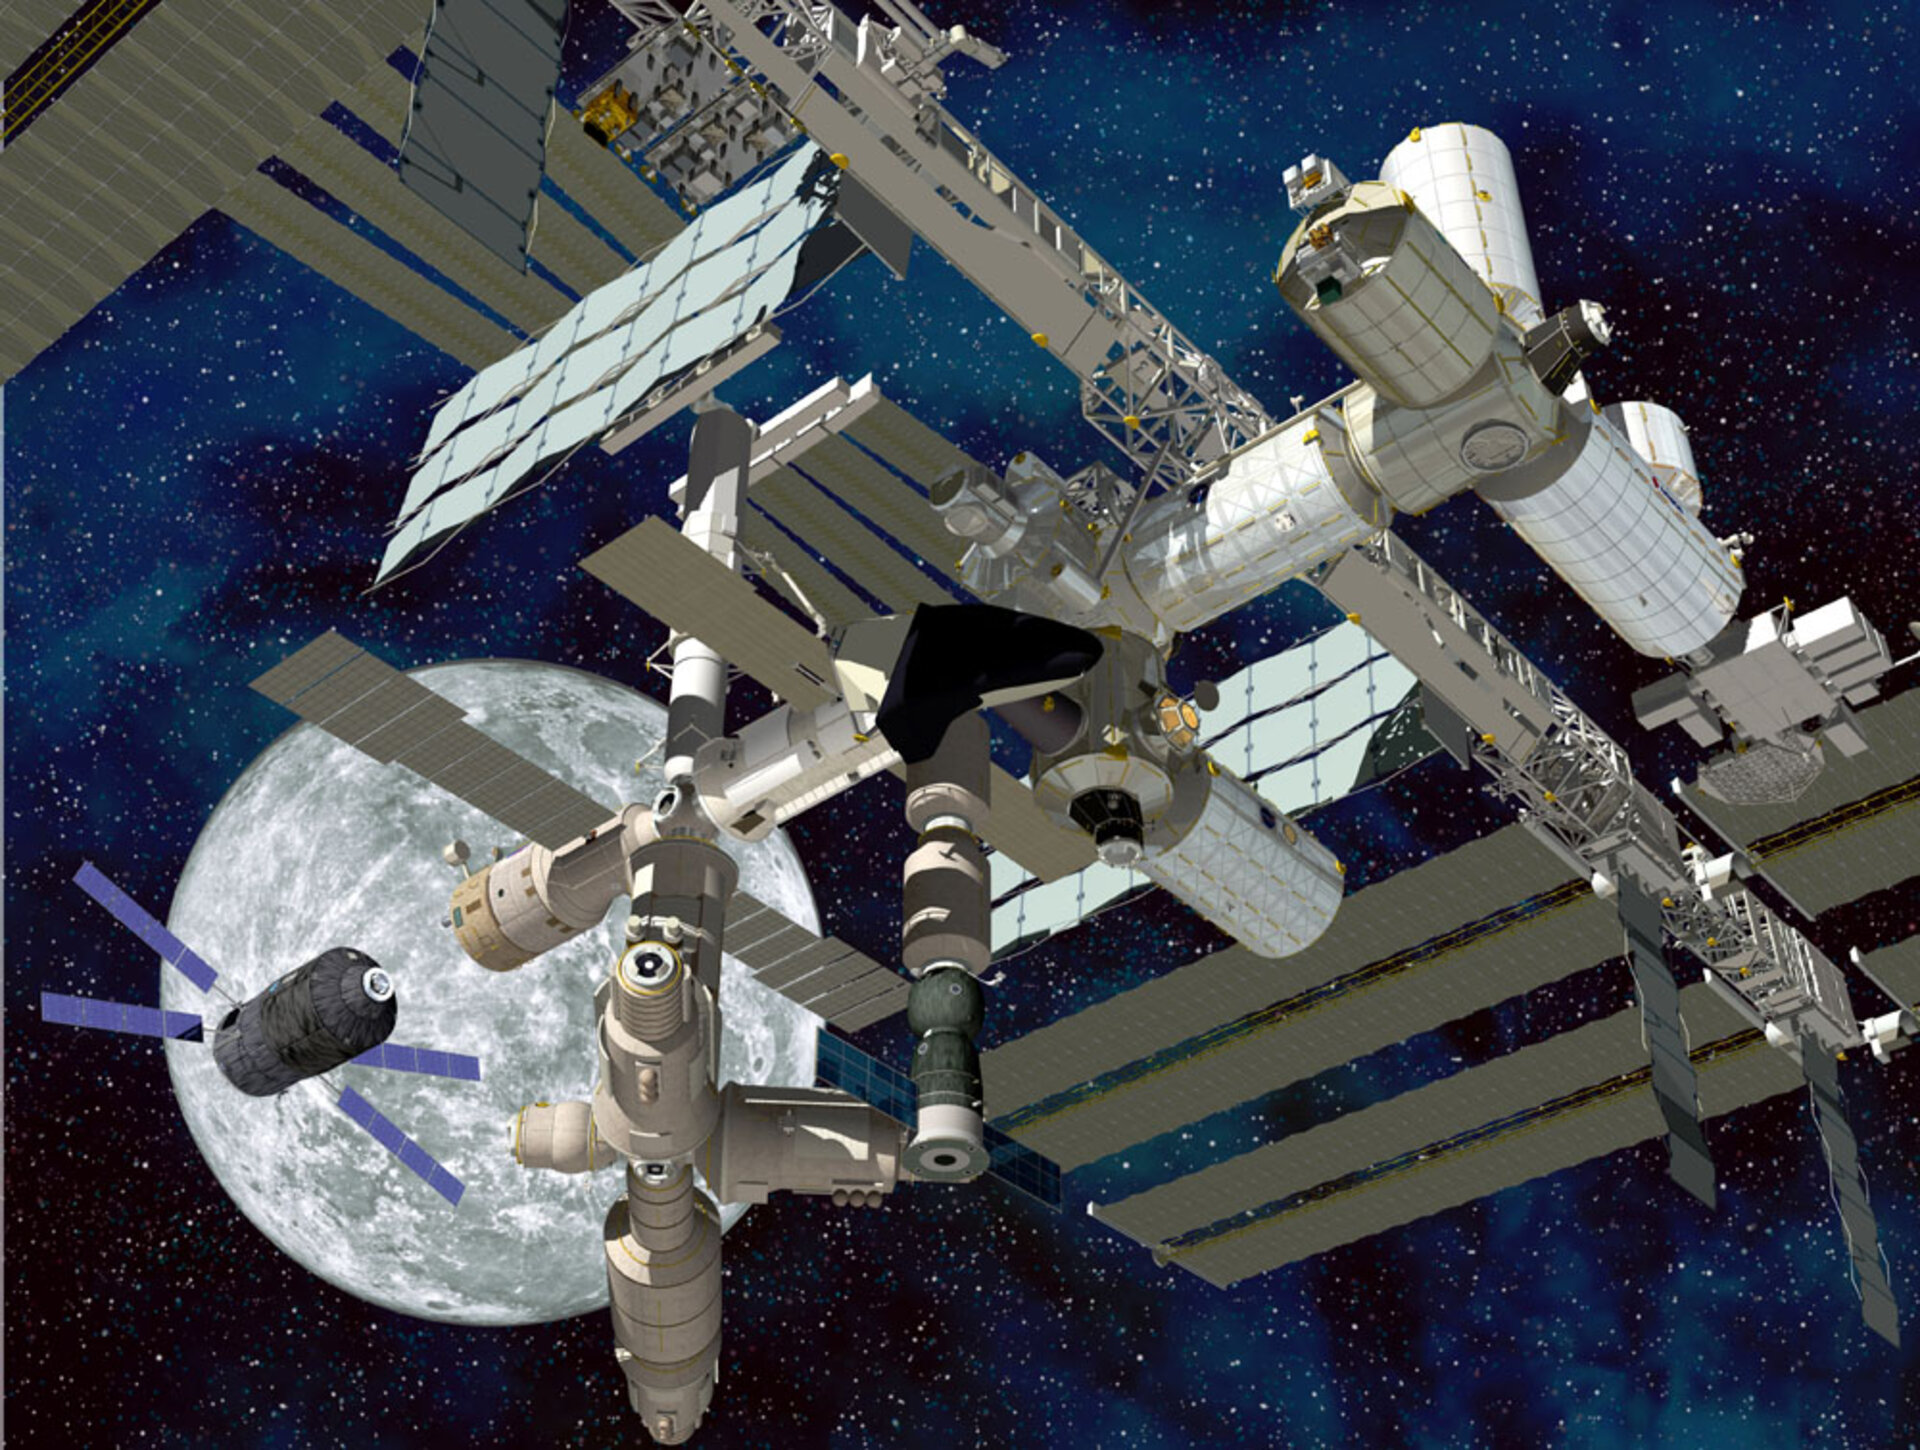 Offer opportunities to students of all ages to design, develop and fly their experiments on board the ISS